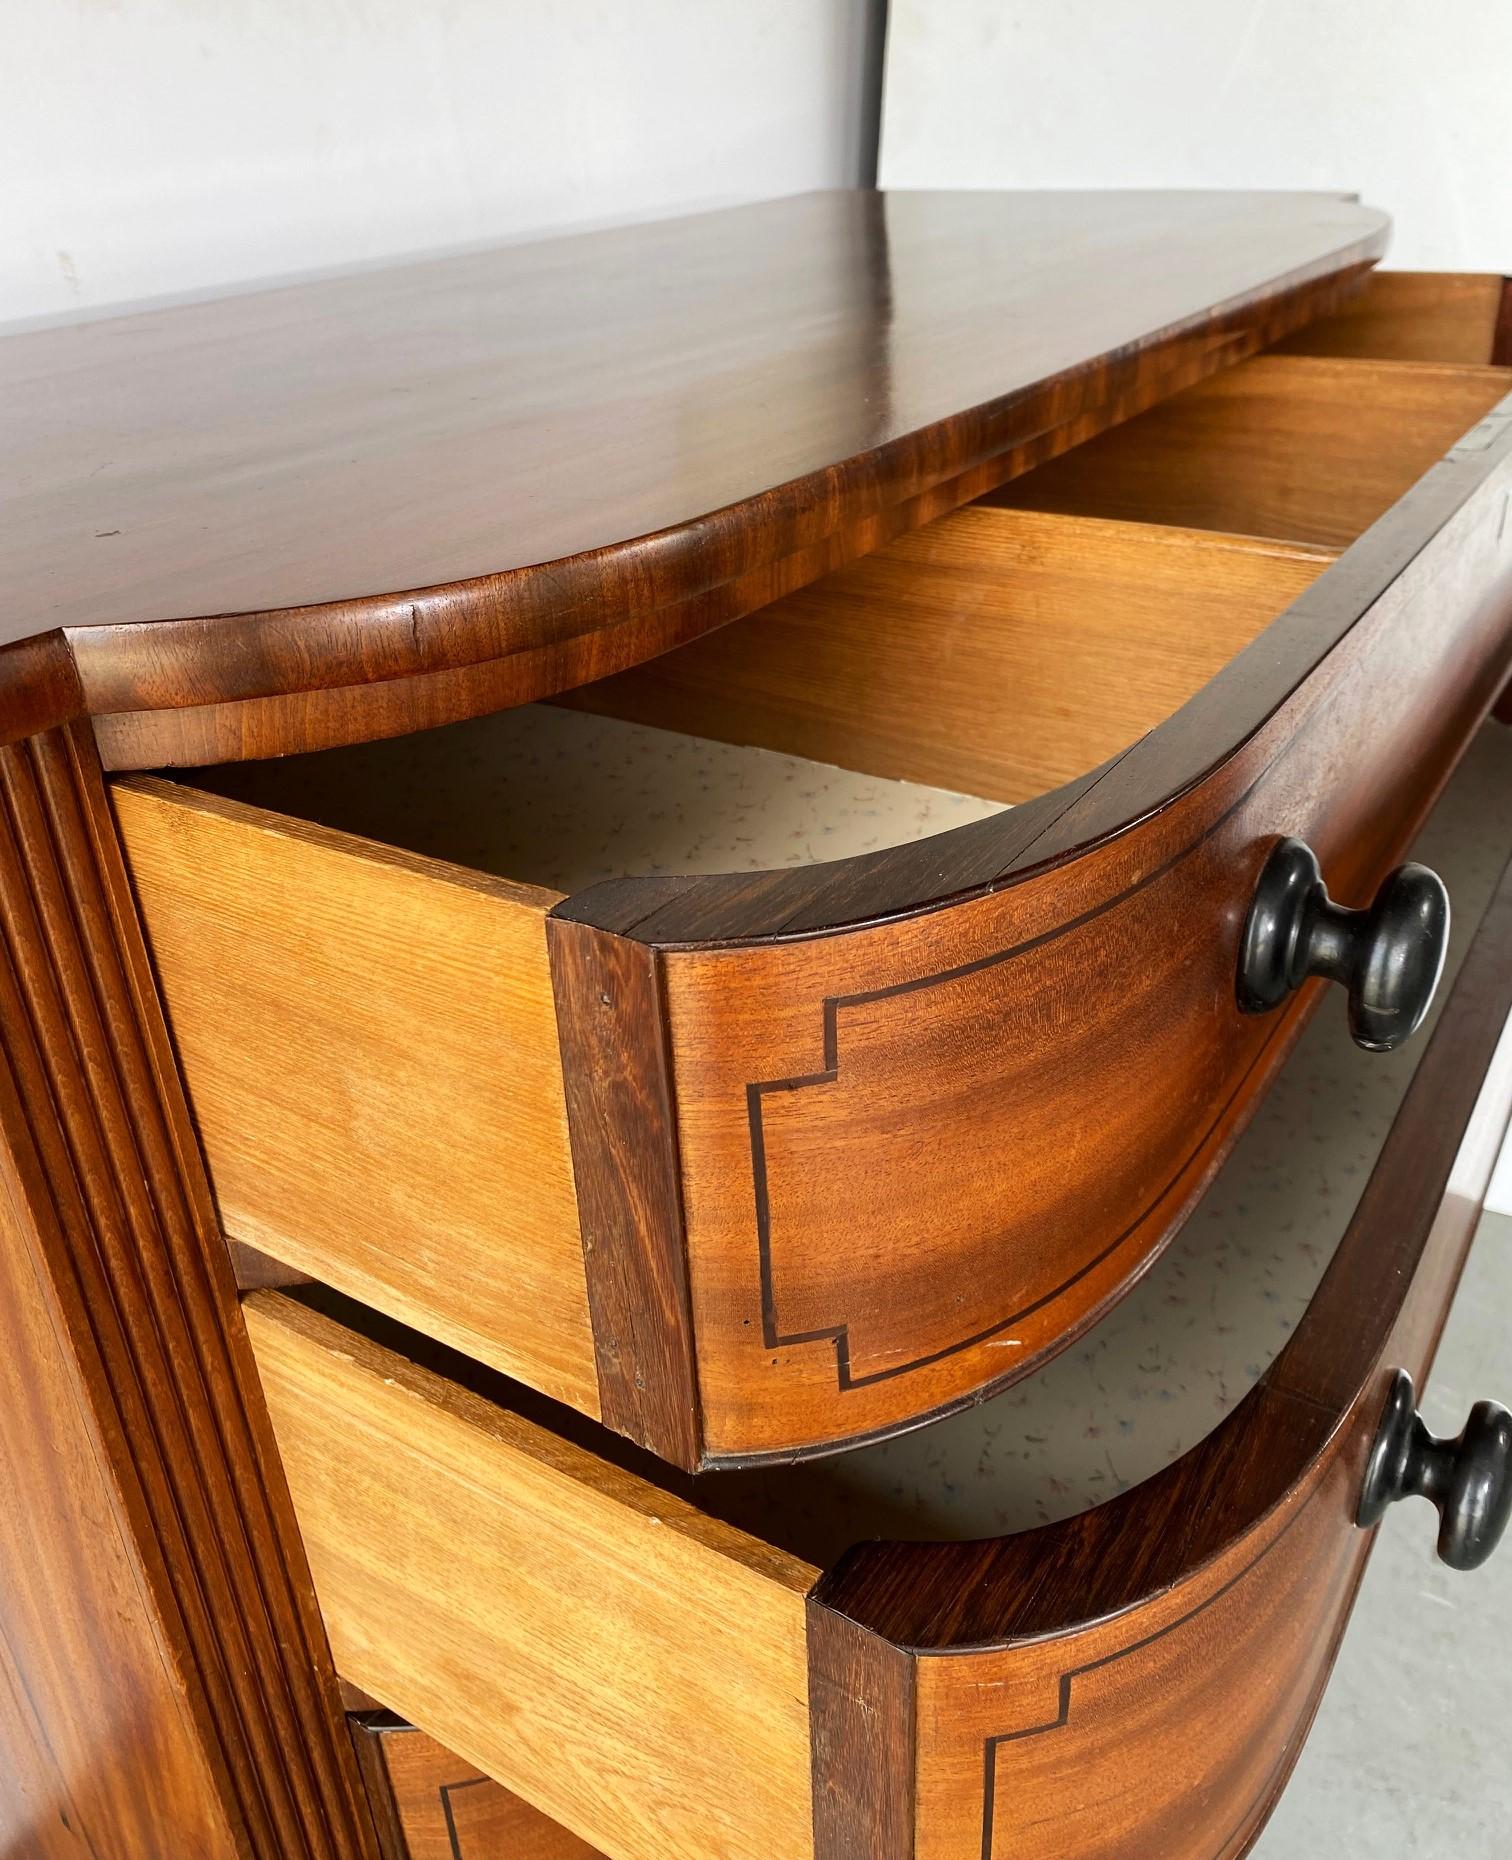 An English bow front chest of drawers in mahogany. Original ebony drawer pulls. Ebony string inlays to the drawer fronts, circa1840. Original ebony drawer pulls.